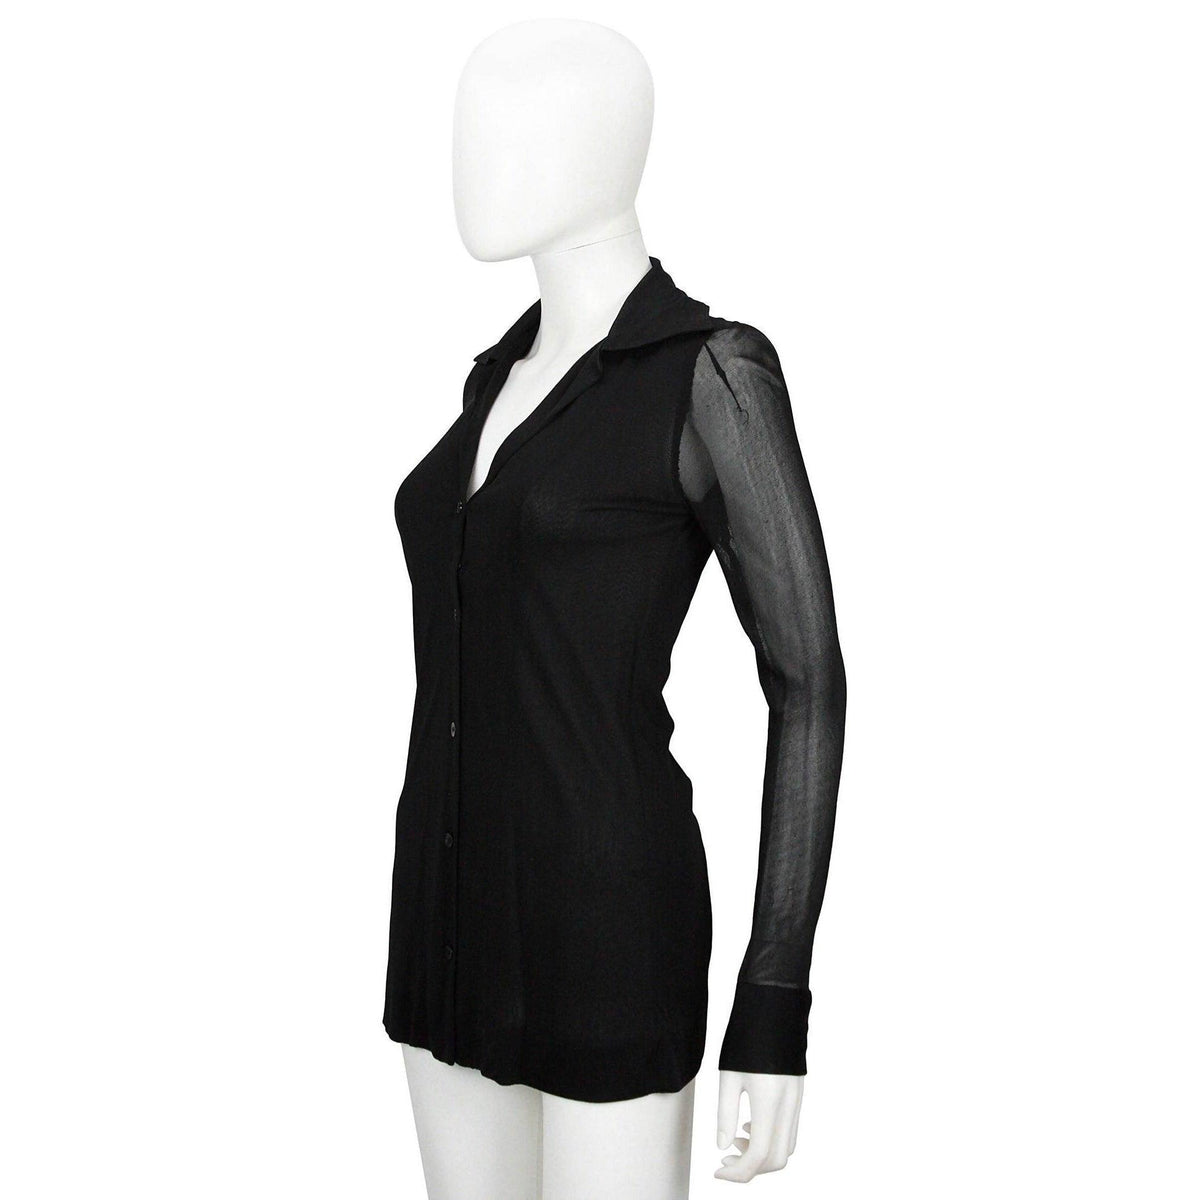 Pre-Owned HALSTON 1970's Black Sheer Jersey Button Down Shirt | Size 30 - theREMODA